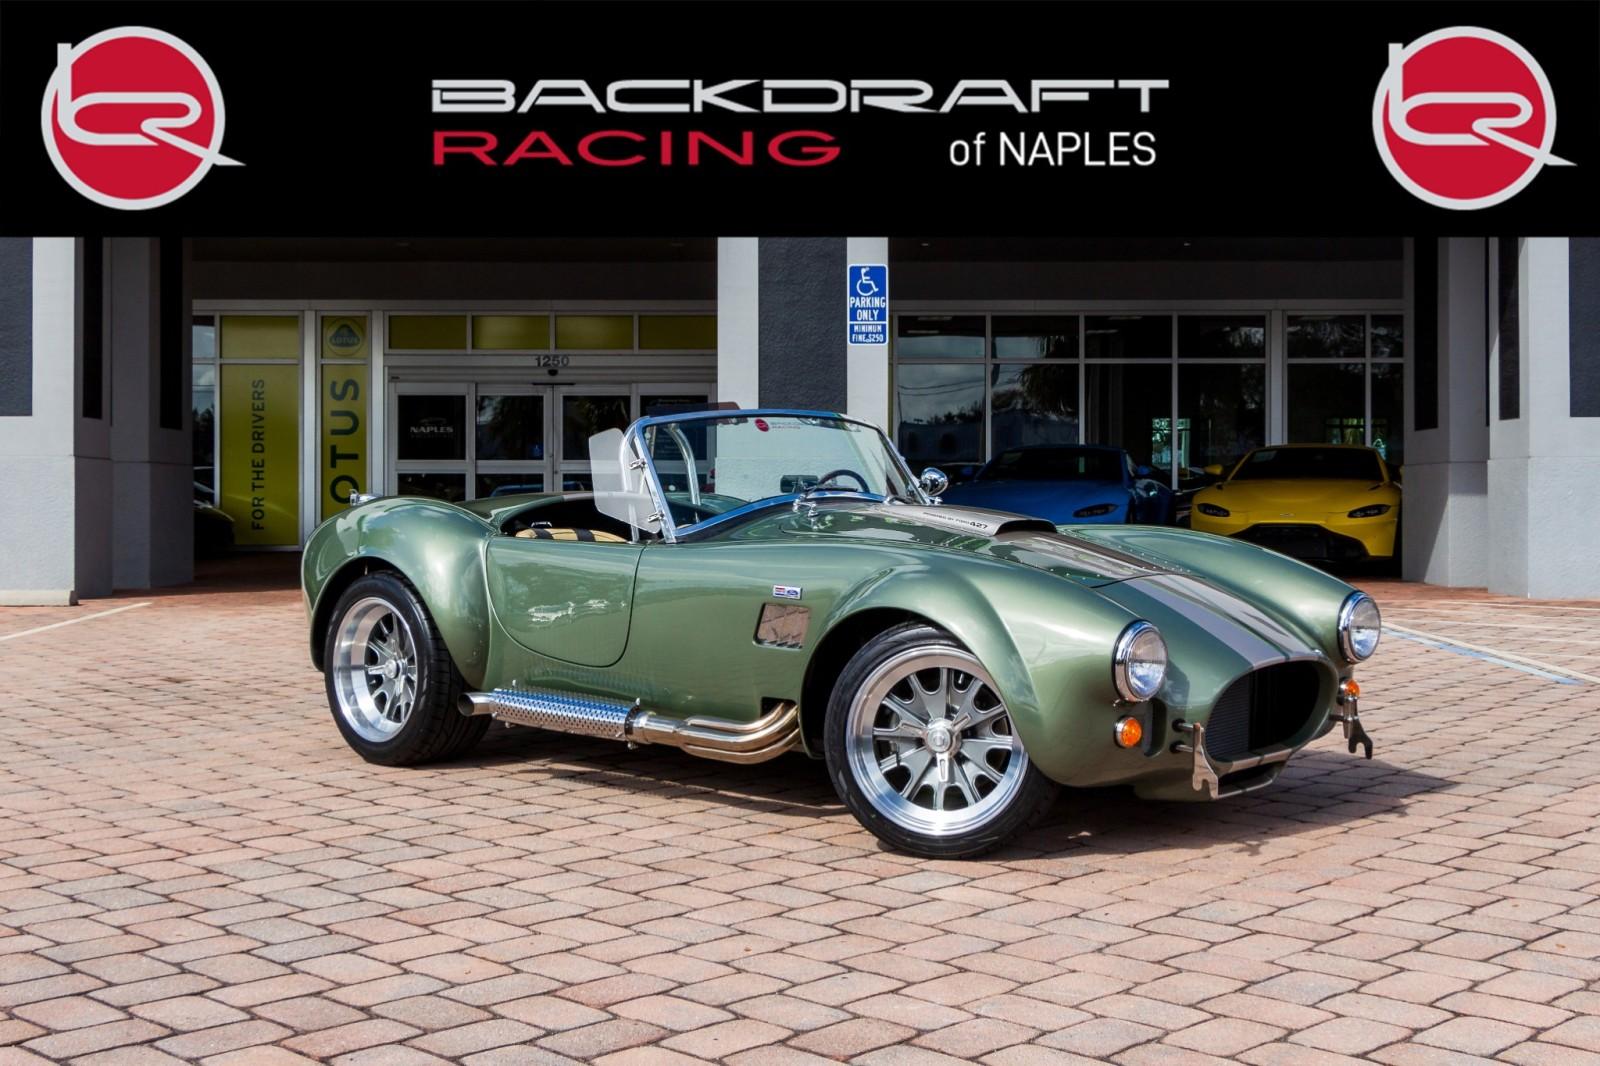 Used 1965 Shelby Cobra Replica Classic For Sale (Sold) Naples Inc - Backdraft Stock #22-MT1023